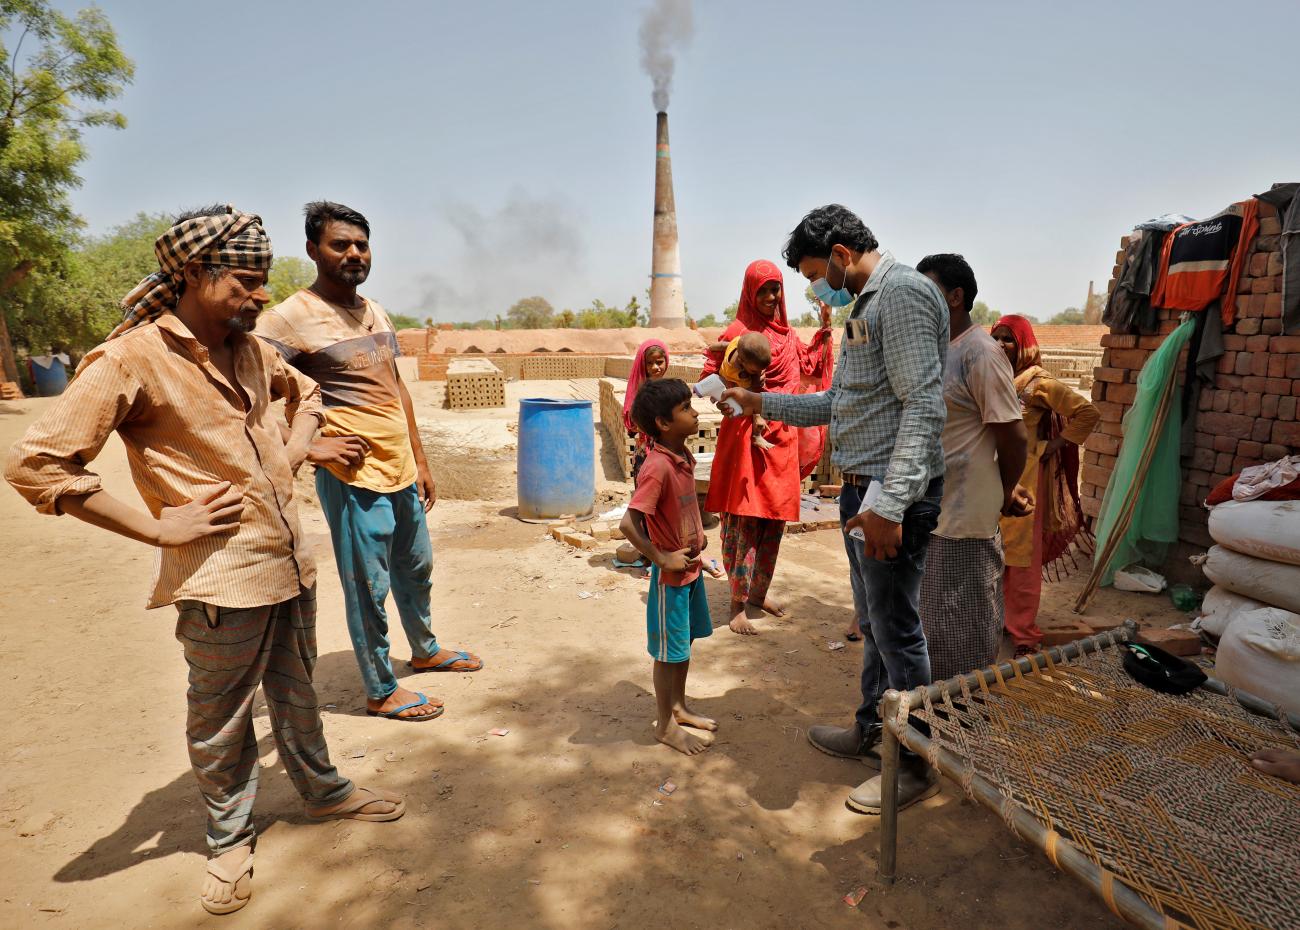 A health-care worker checks the temperature of a boy during a COVID-19 vaccination drive at a brick kiln at Kavitha village on the outskirts of Ahmedabad, India on April 8, 2021. 